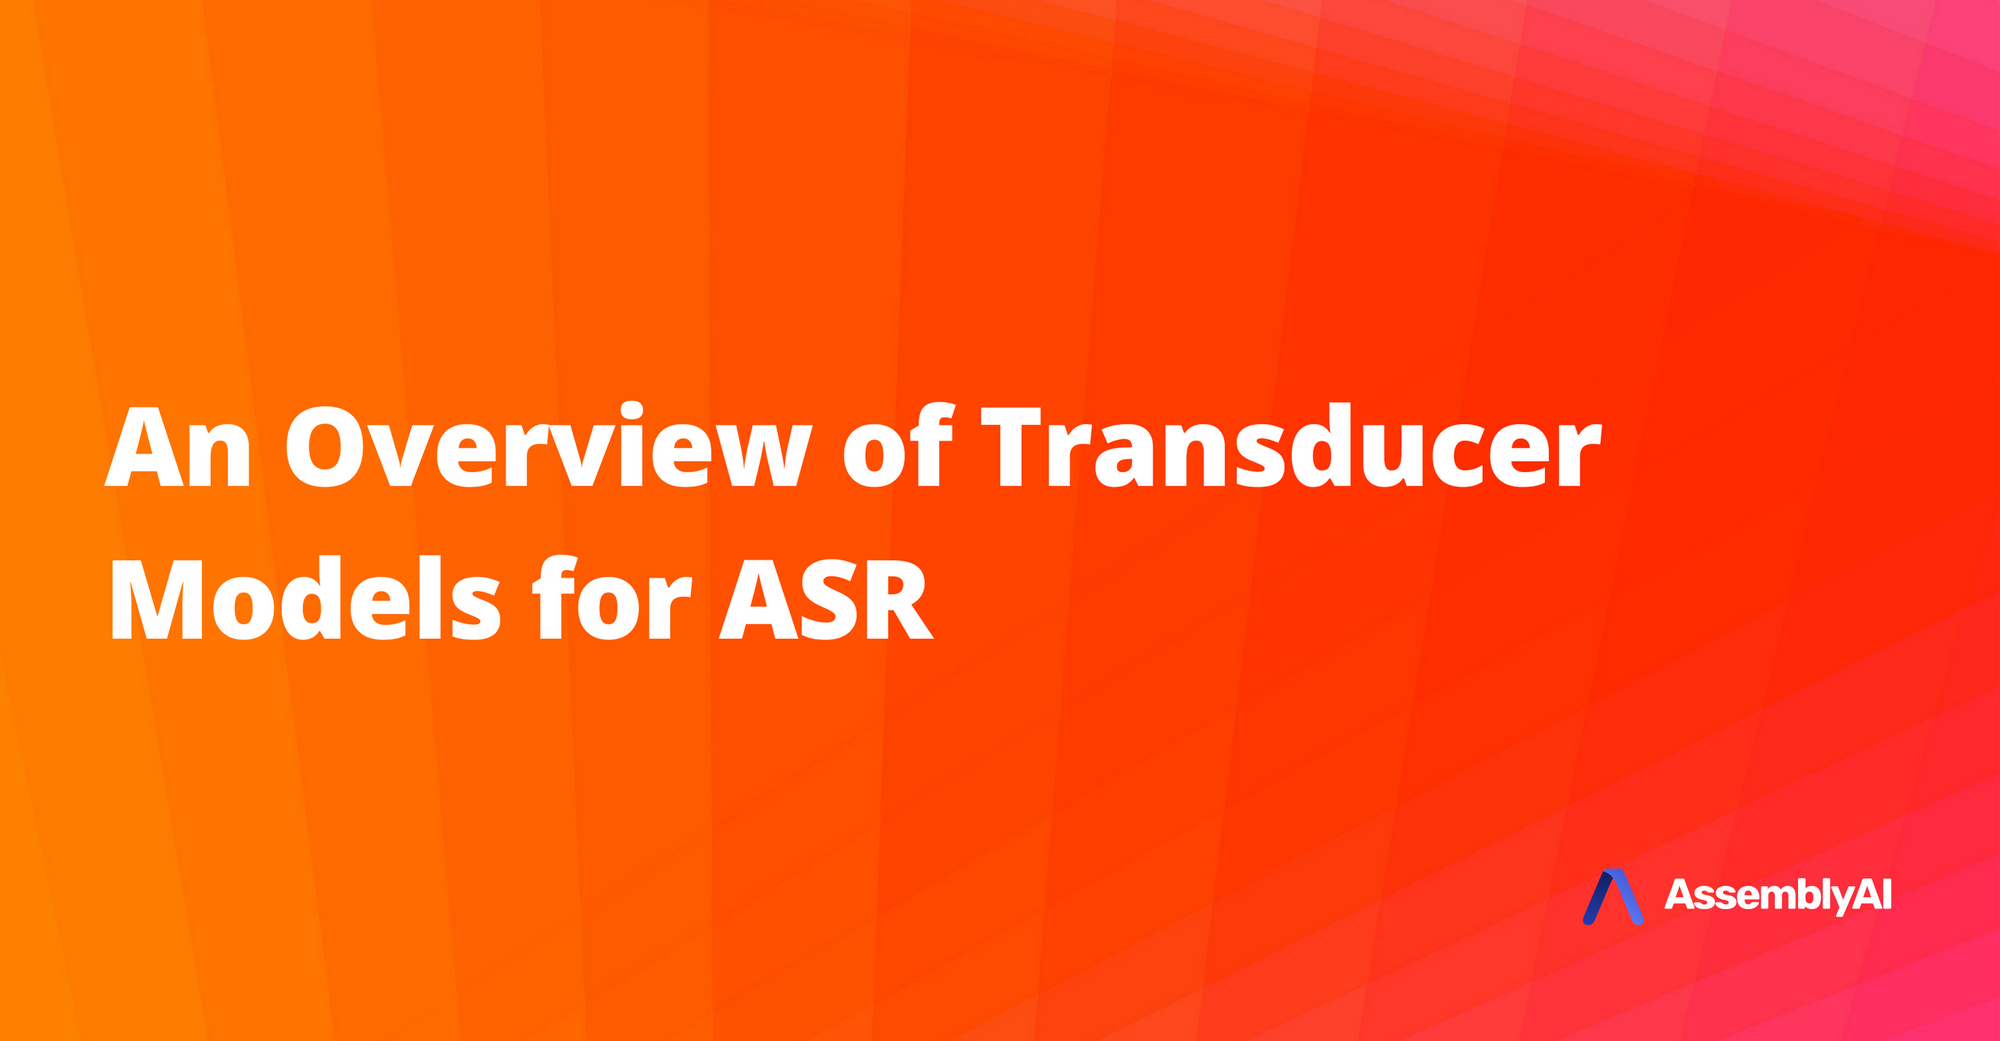 An Overview of Transducer Models for ASR